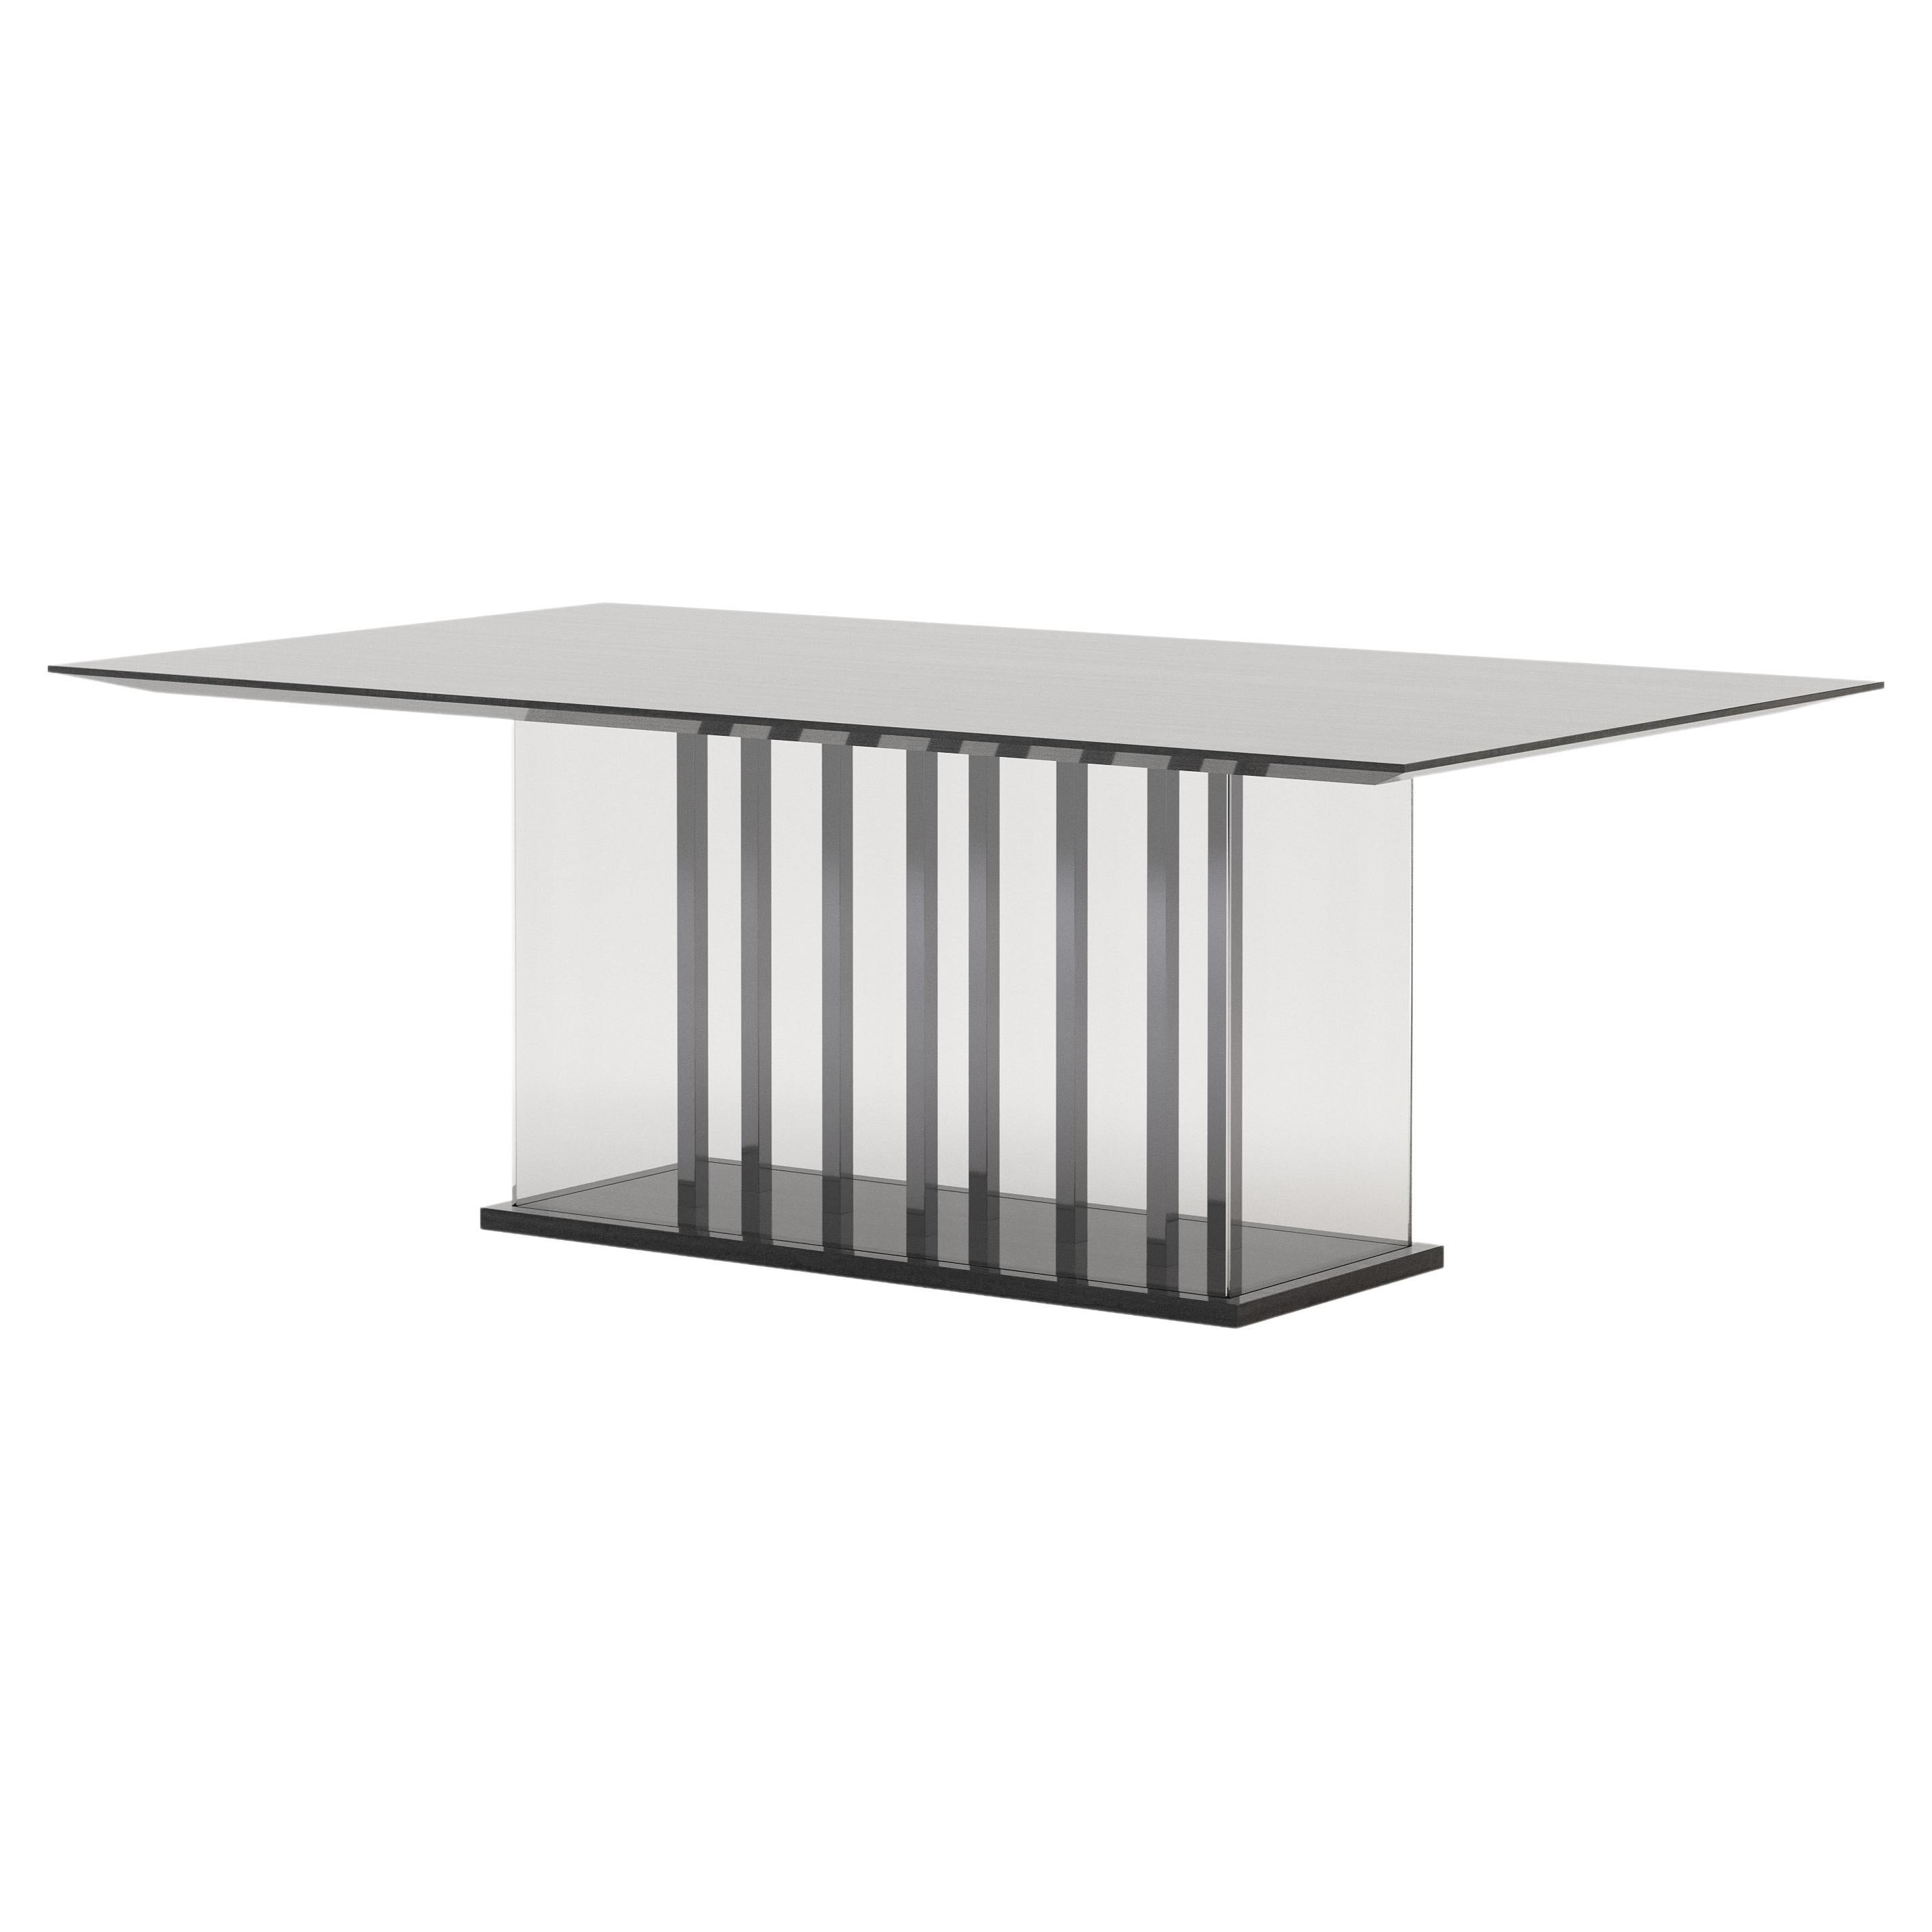 Art Deco style His Dining Table Made with Wood, Glass And Iron By Stylish Club